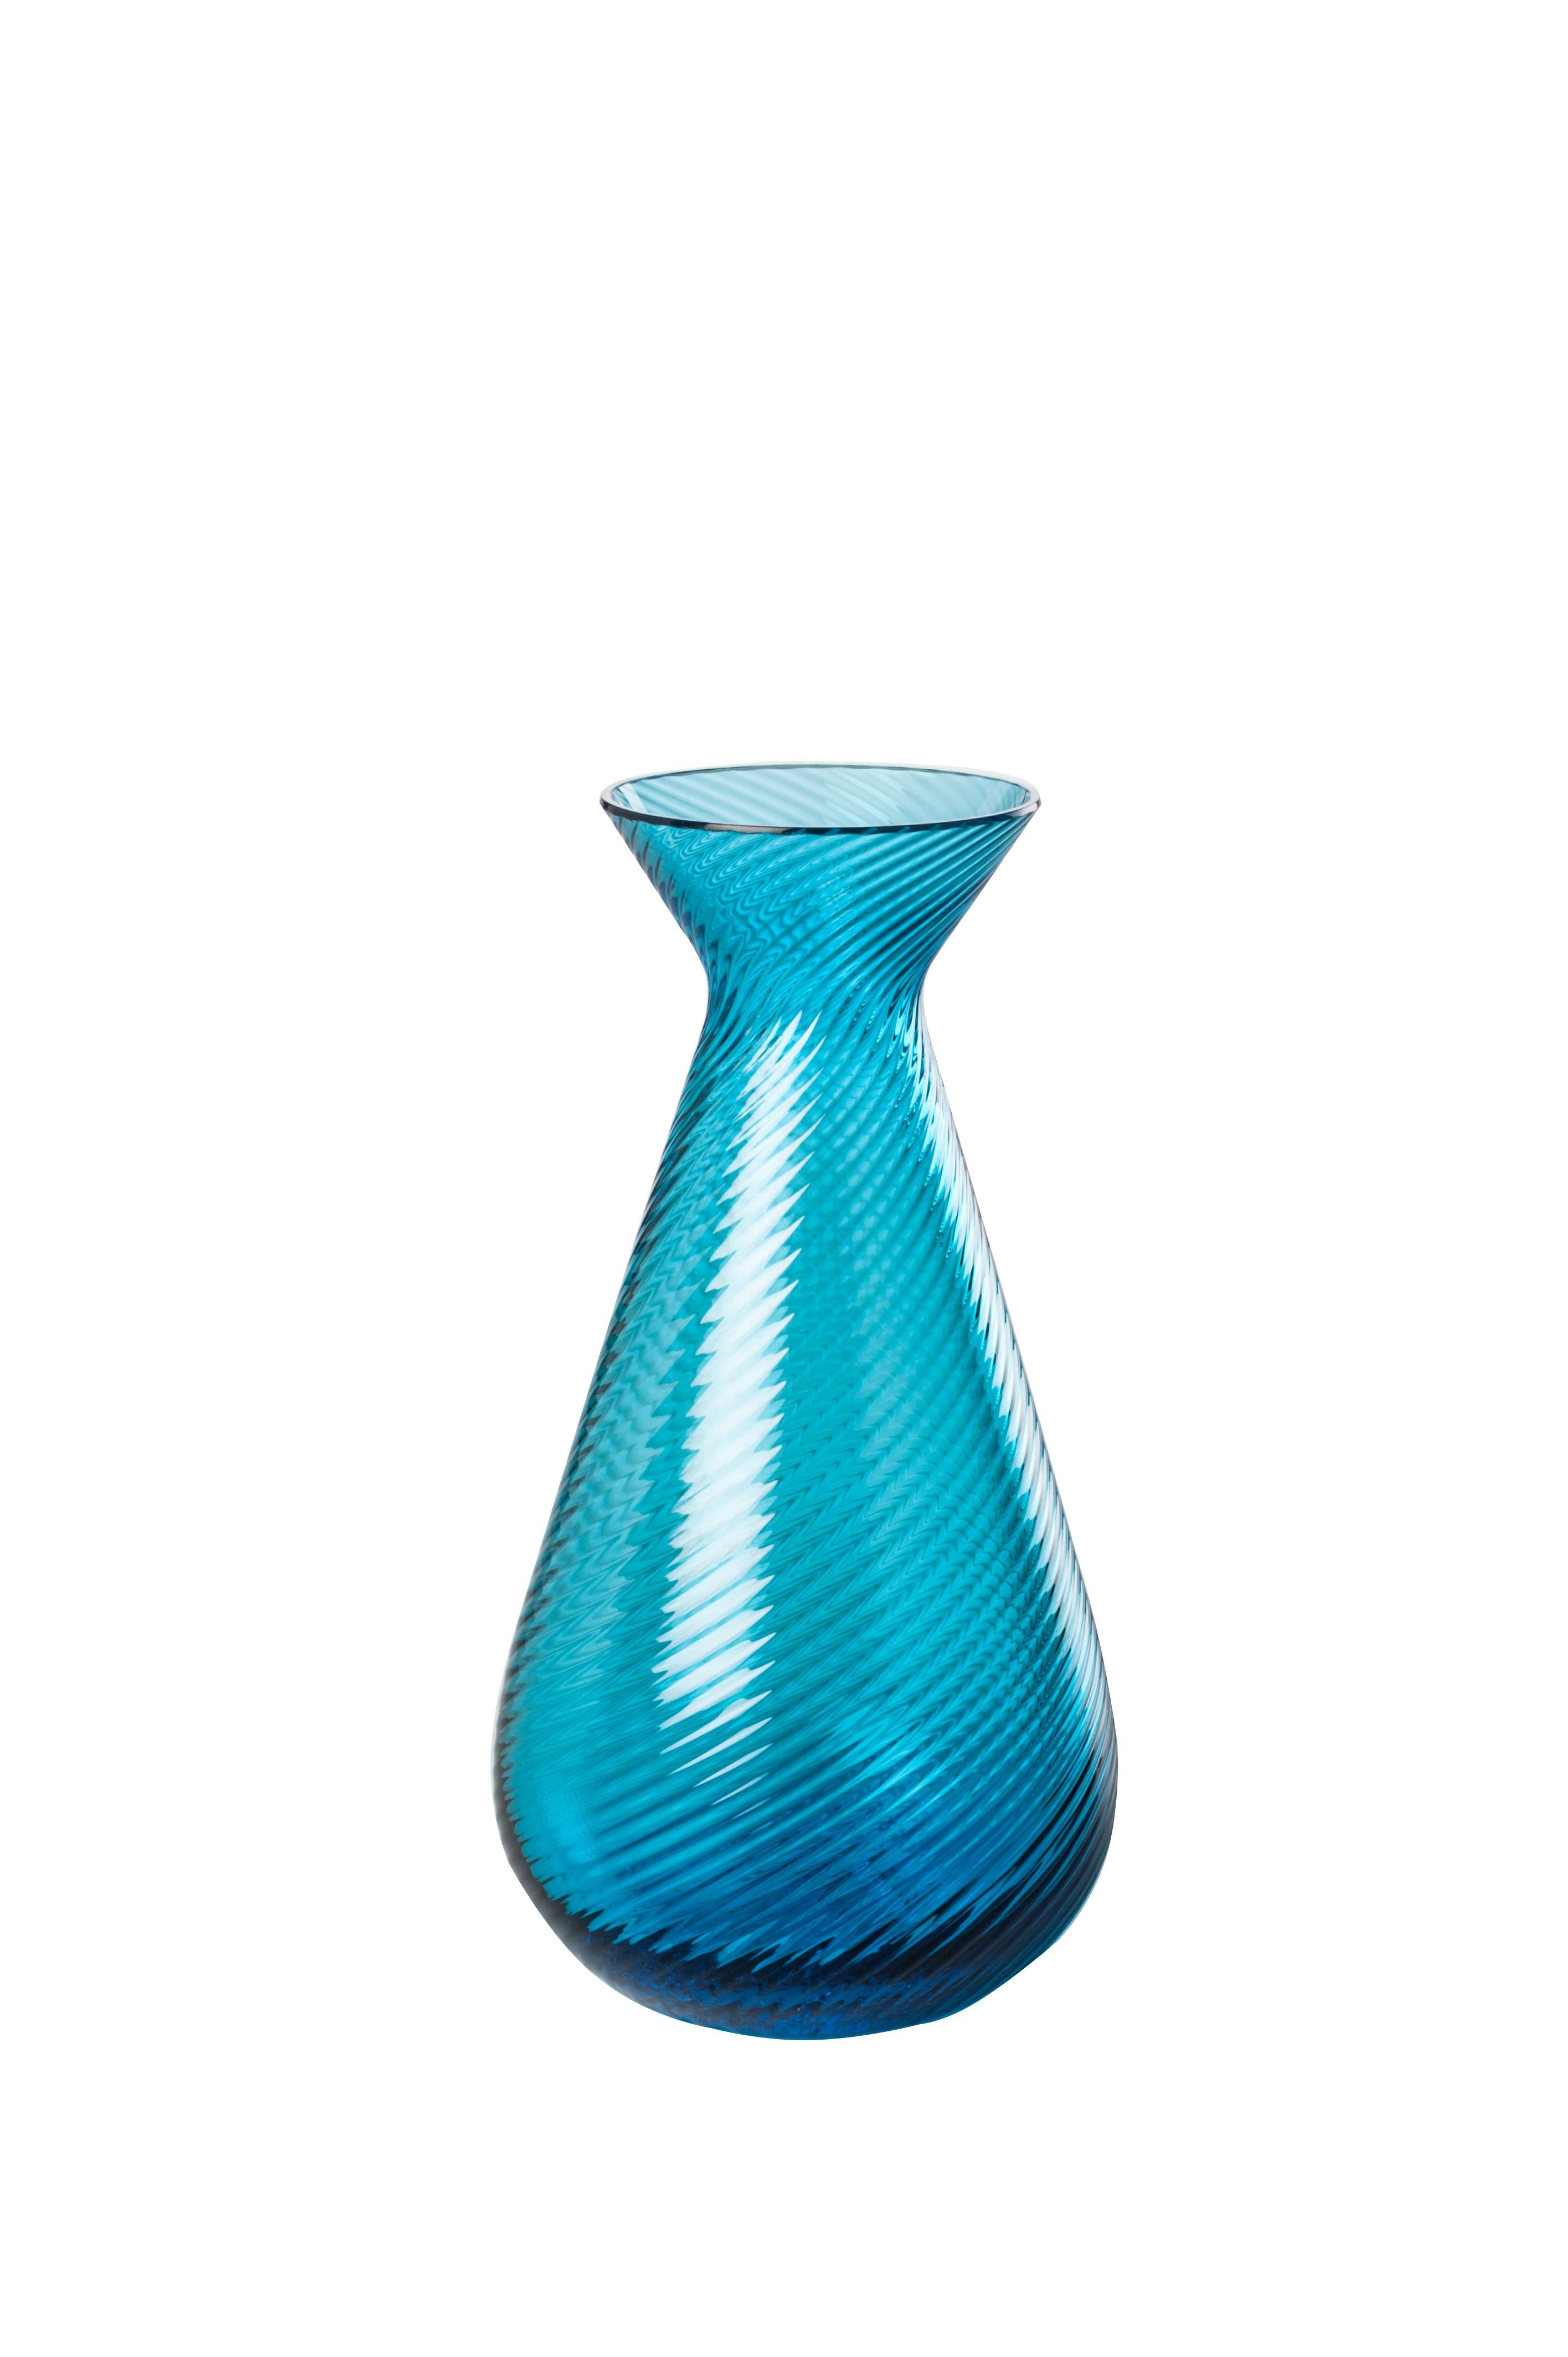 Venini glass vase with shaped body and neck in aquamarine designed in 2017. Perfect for indoor home decor as container or statement piece for any room. Also available in other colors on 1stdibs.

Dimensions: 8 cm diameter x 15.5 cm height.